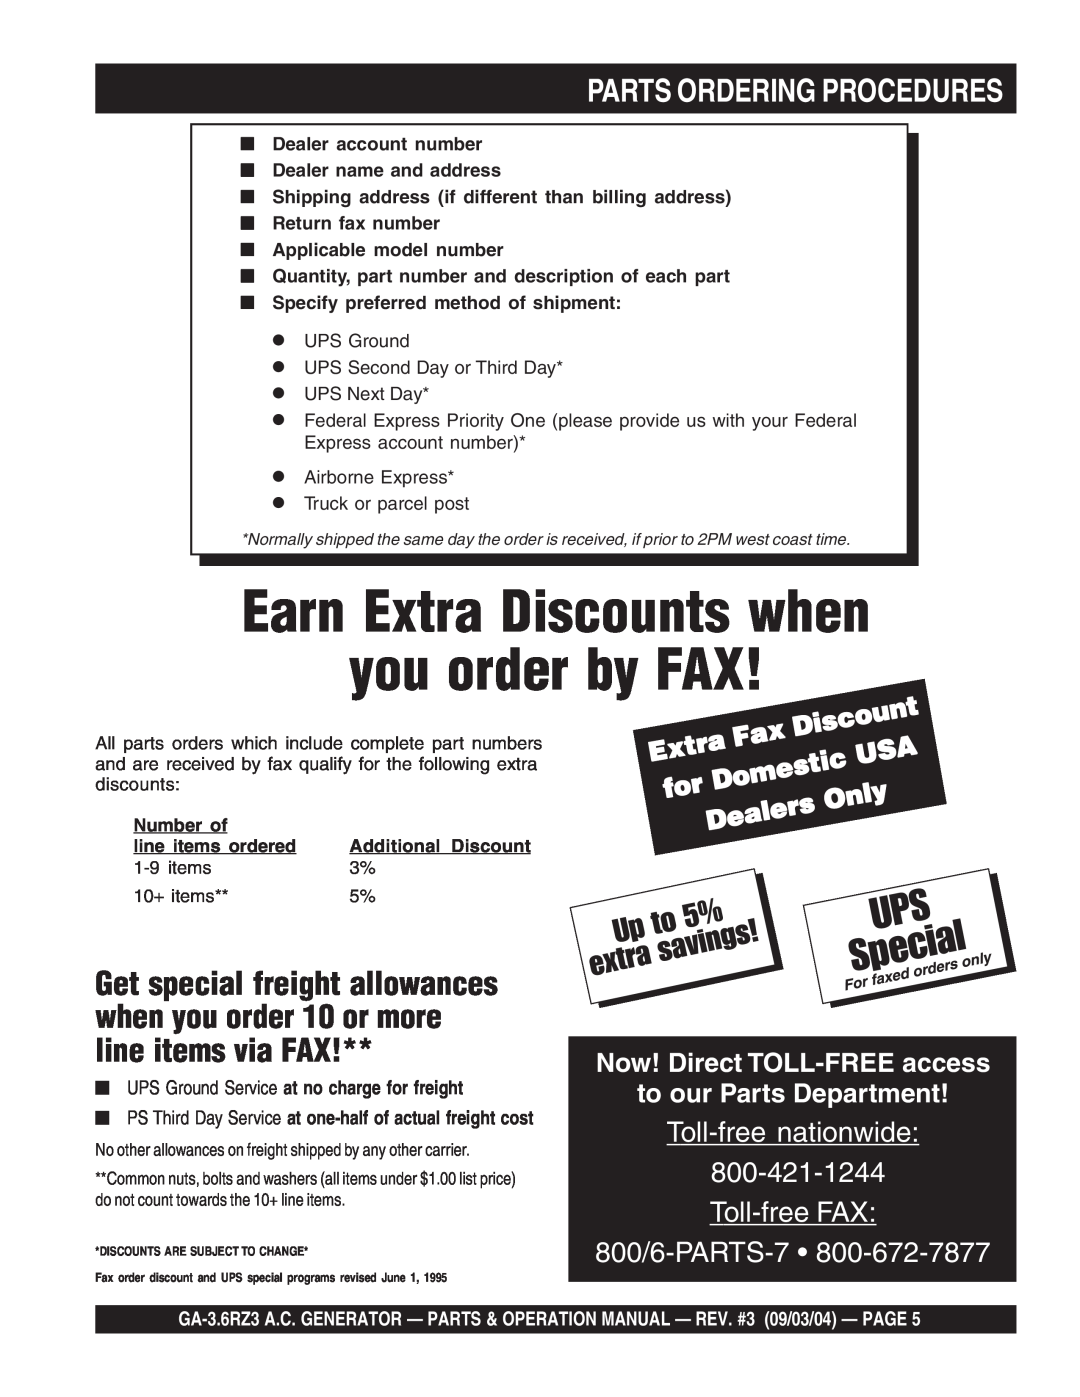 Multiquip GA-3.6RZ3 Earn Extra Discounts when you order by FAX, Parts Ordering Procedures, Domestic, Dealers, Only 